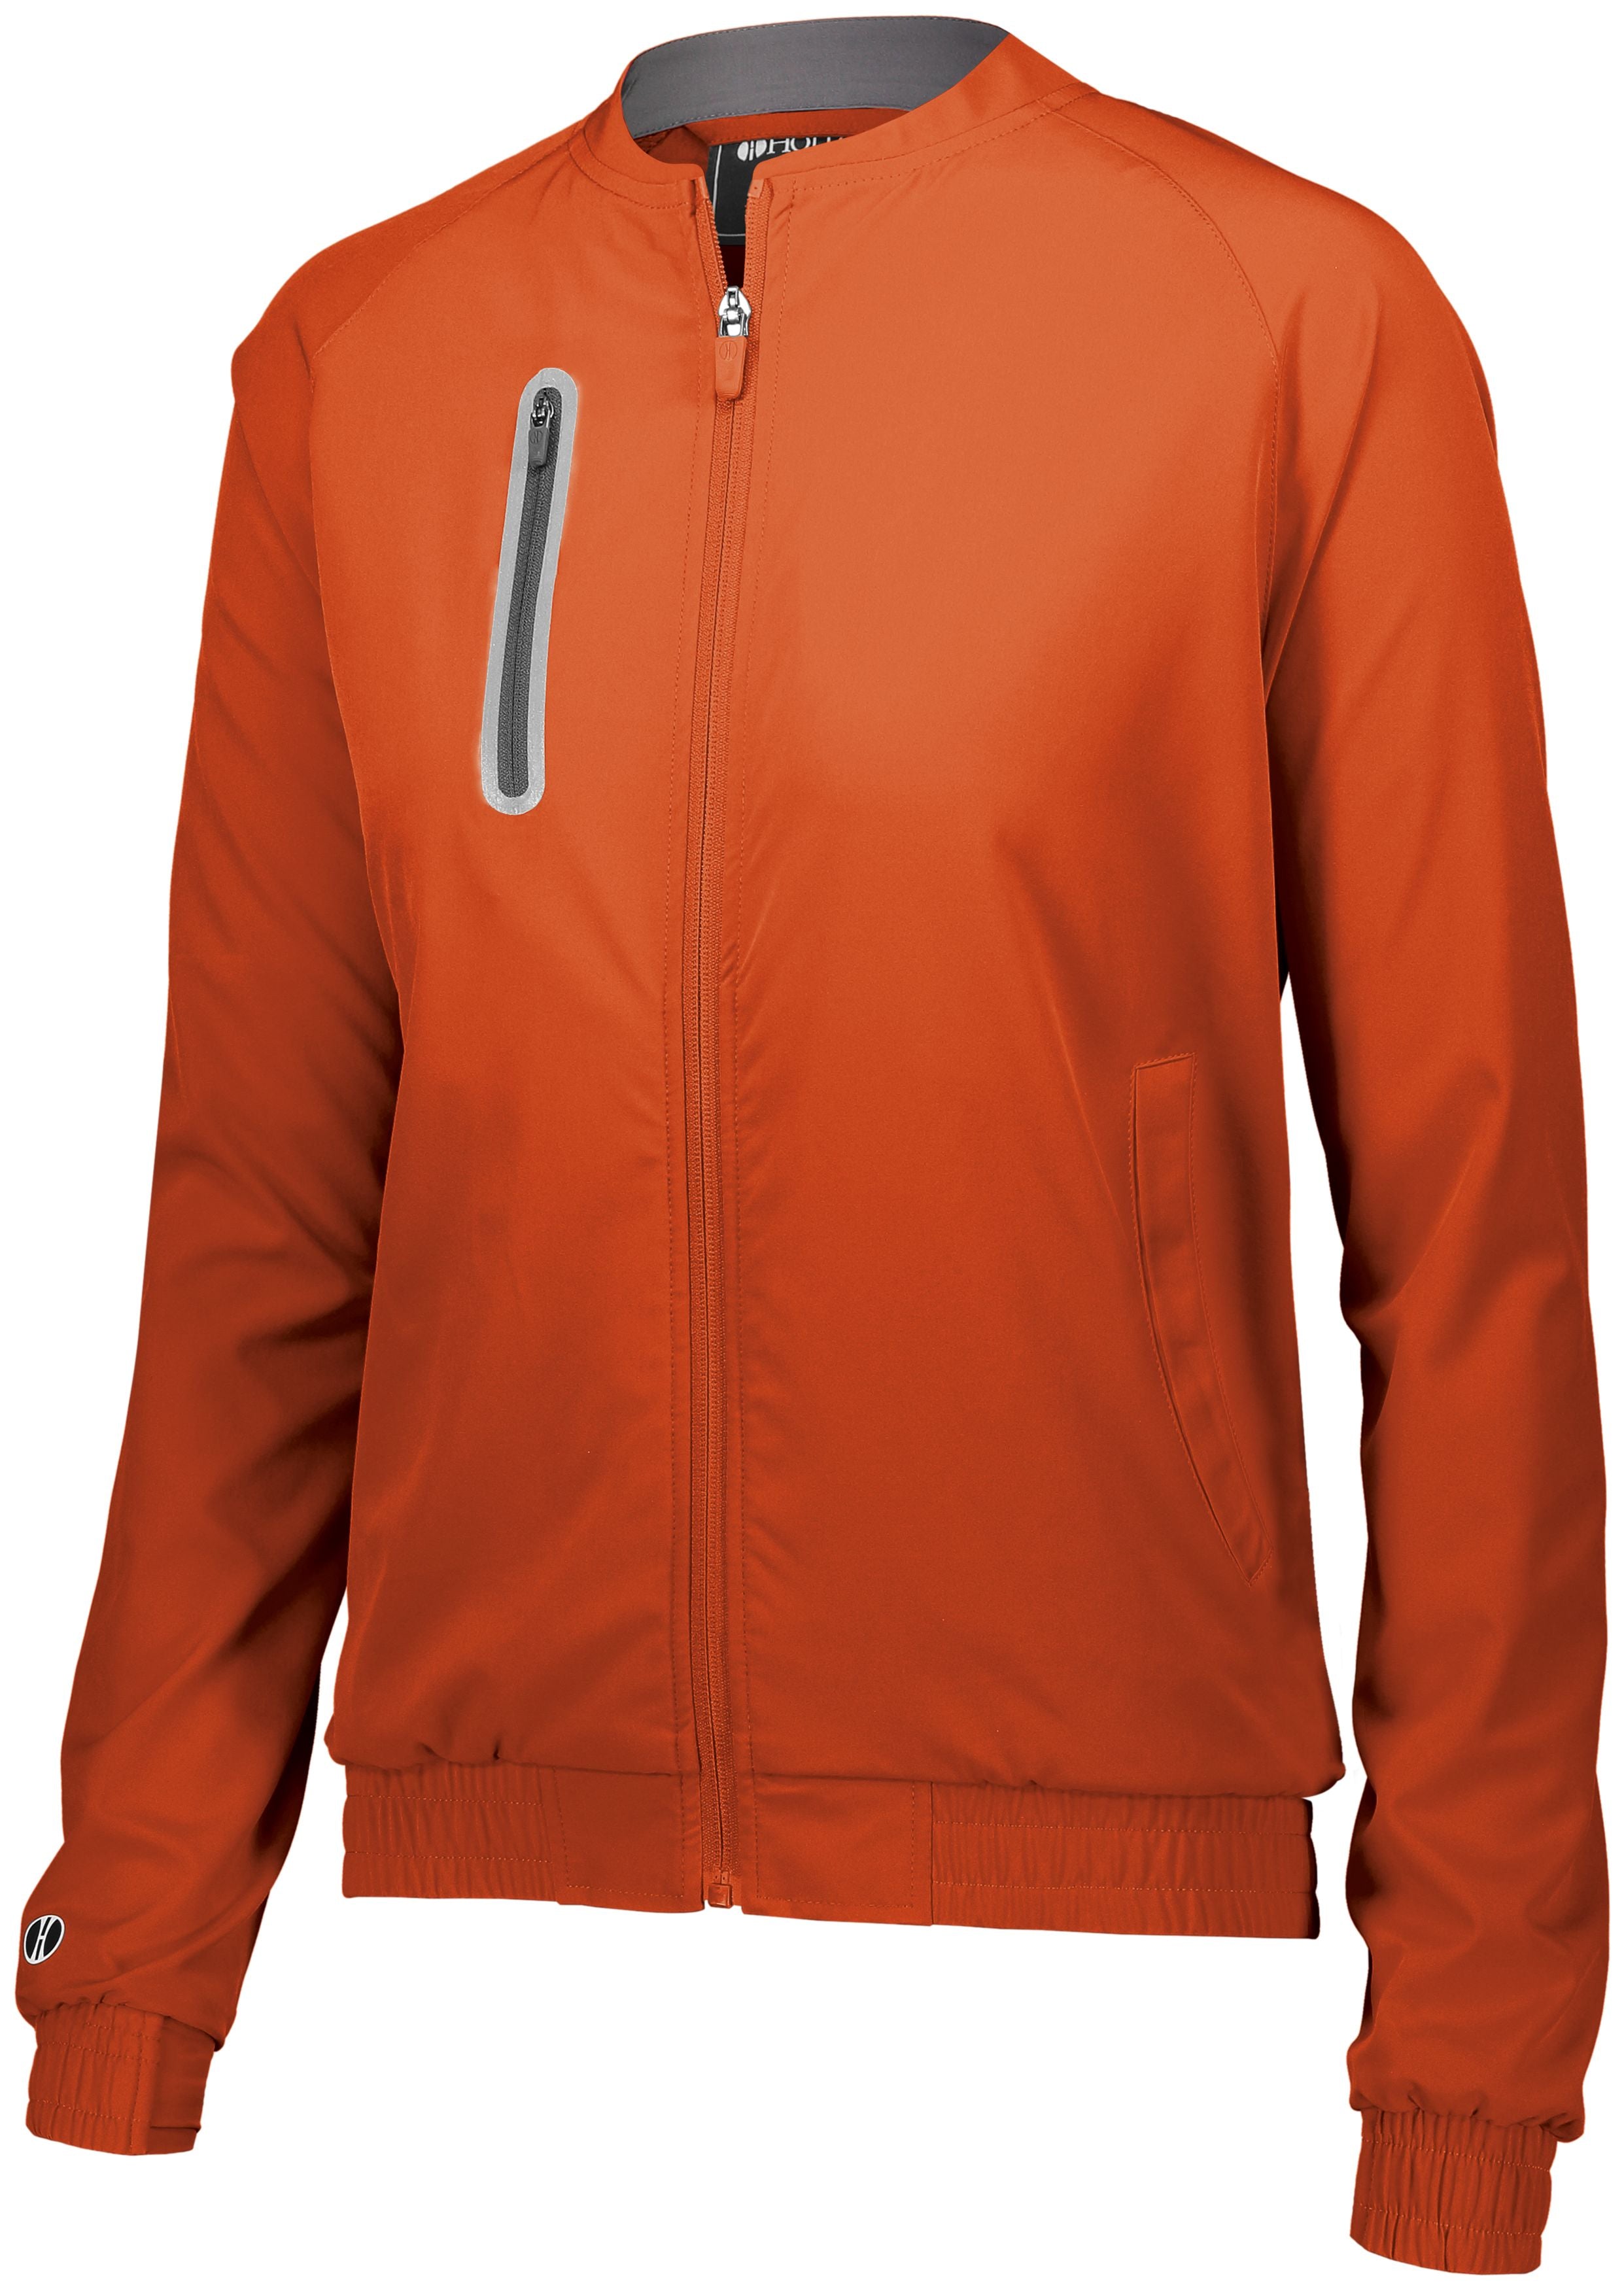 Holloway Ladies Weld Jacket in Orange  -Part of the Ladies, Ladies-Jacket, Holloway, Outerwear, Weld-Collection product lines at KanaleyCreations.com